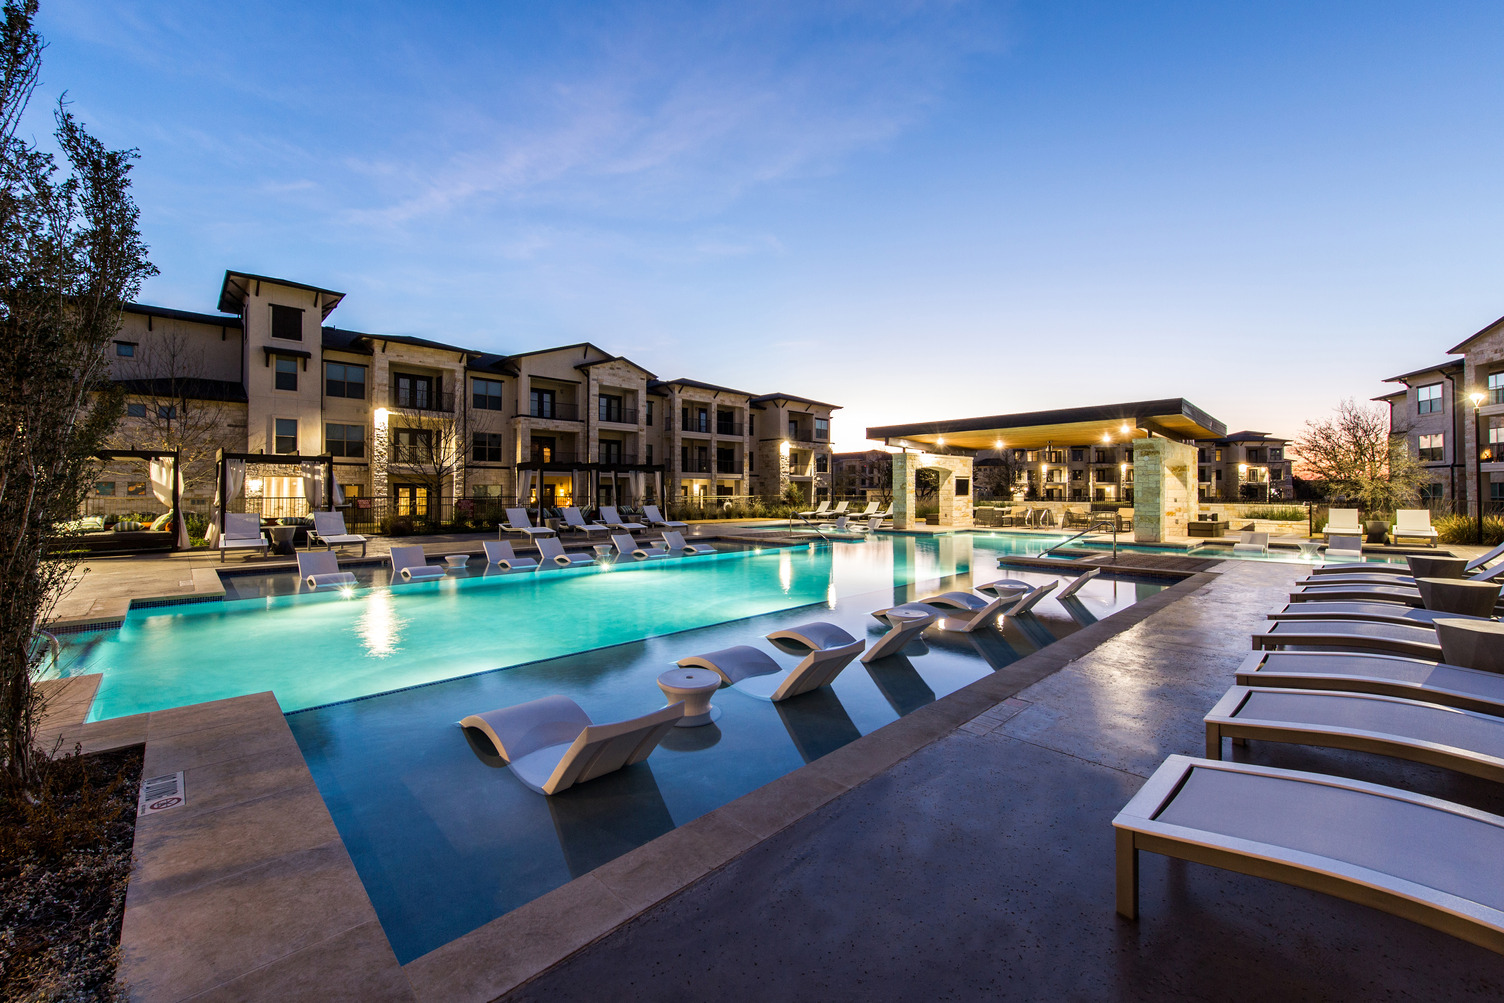 View of in-pool loungers at dusk in large pool courtyard